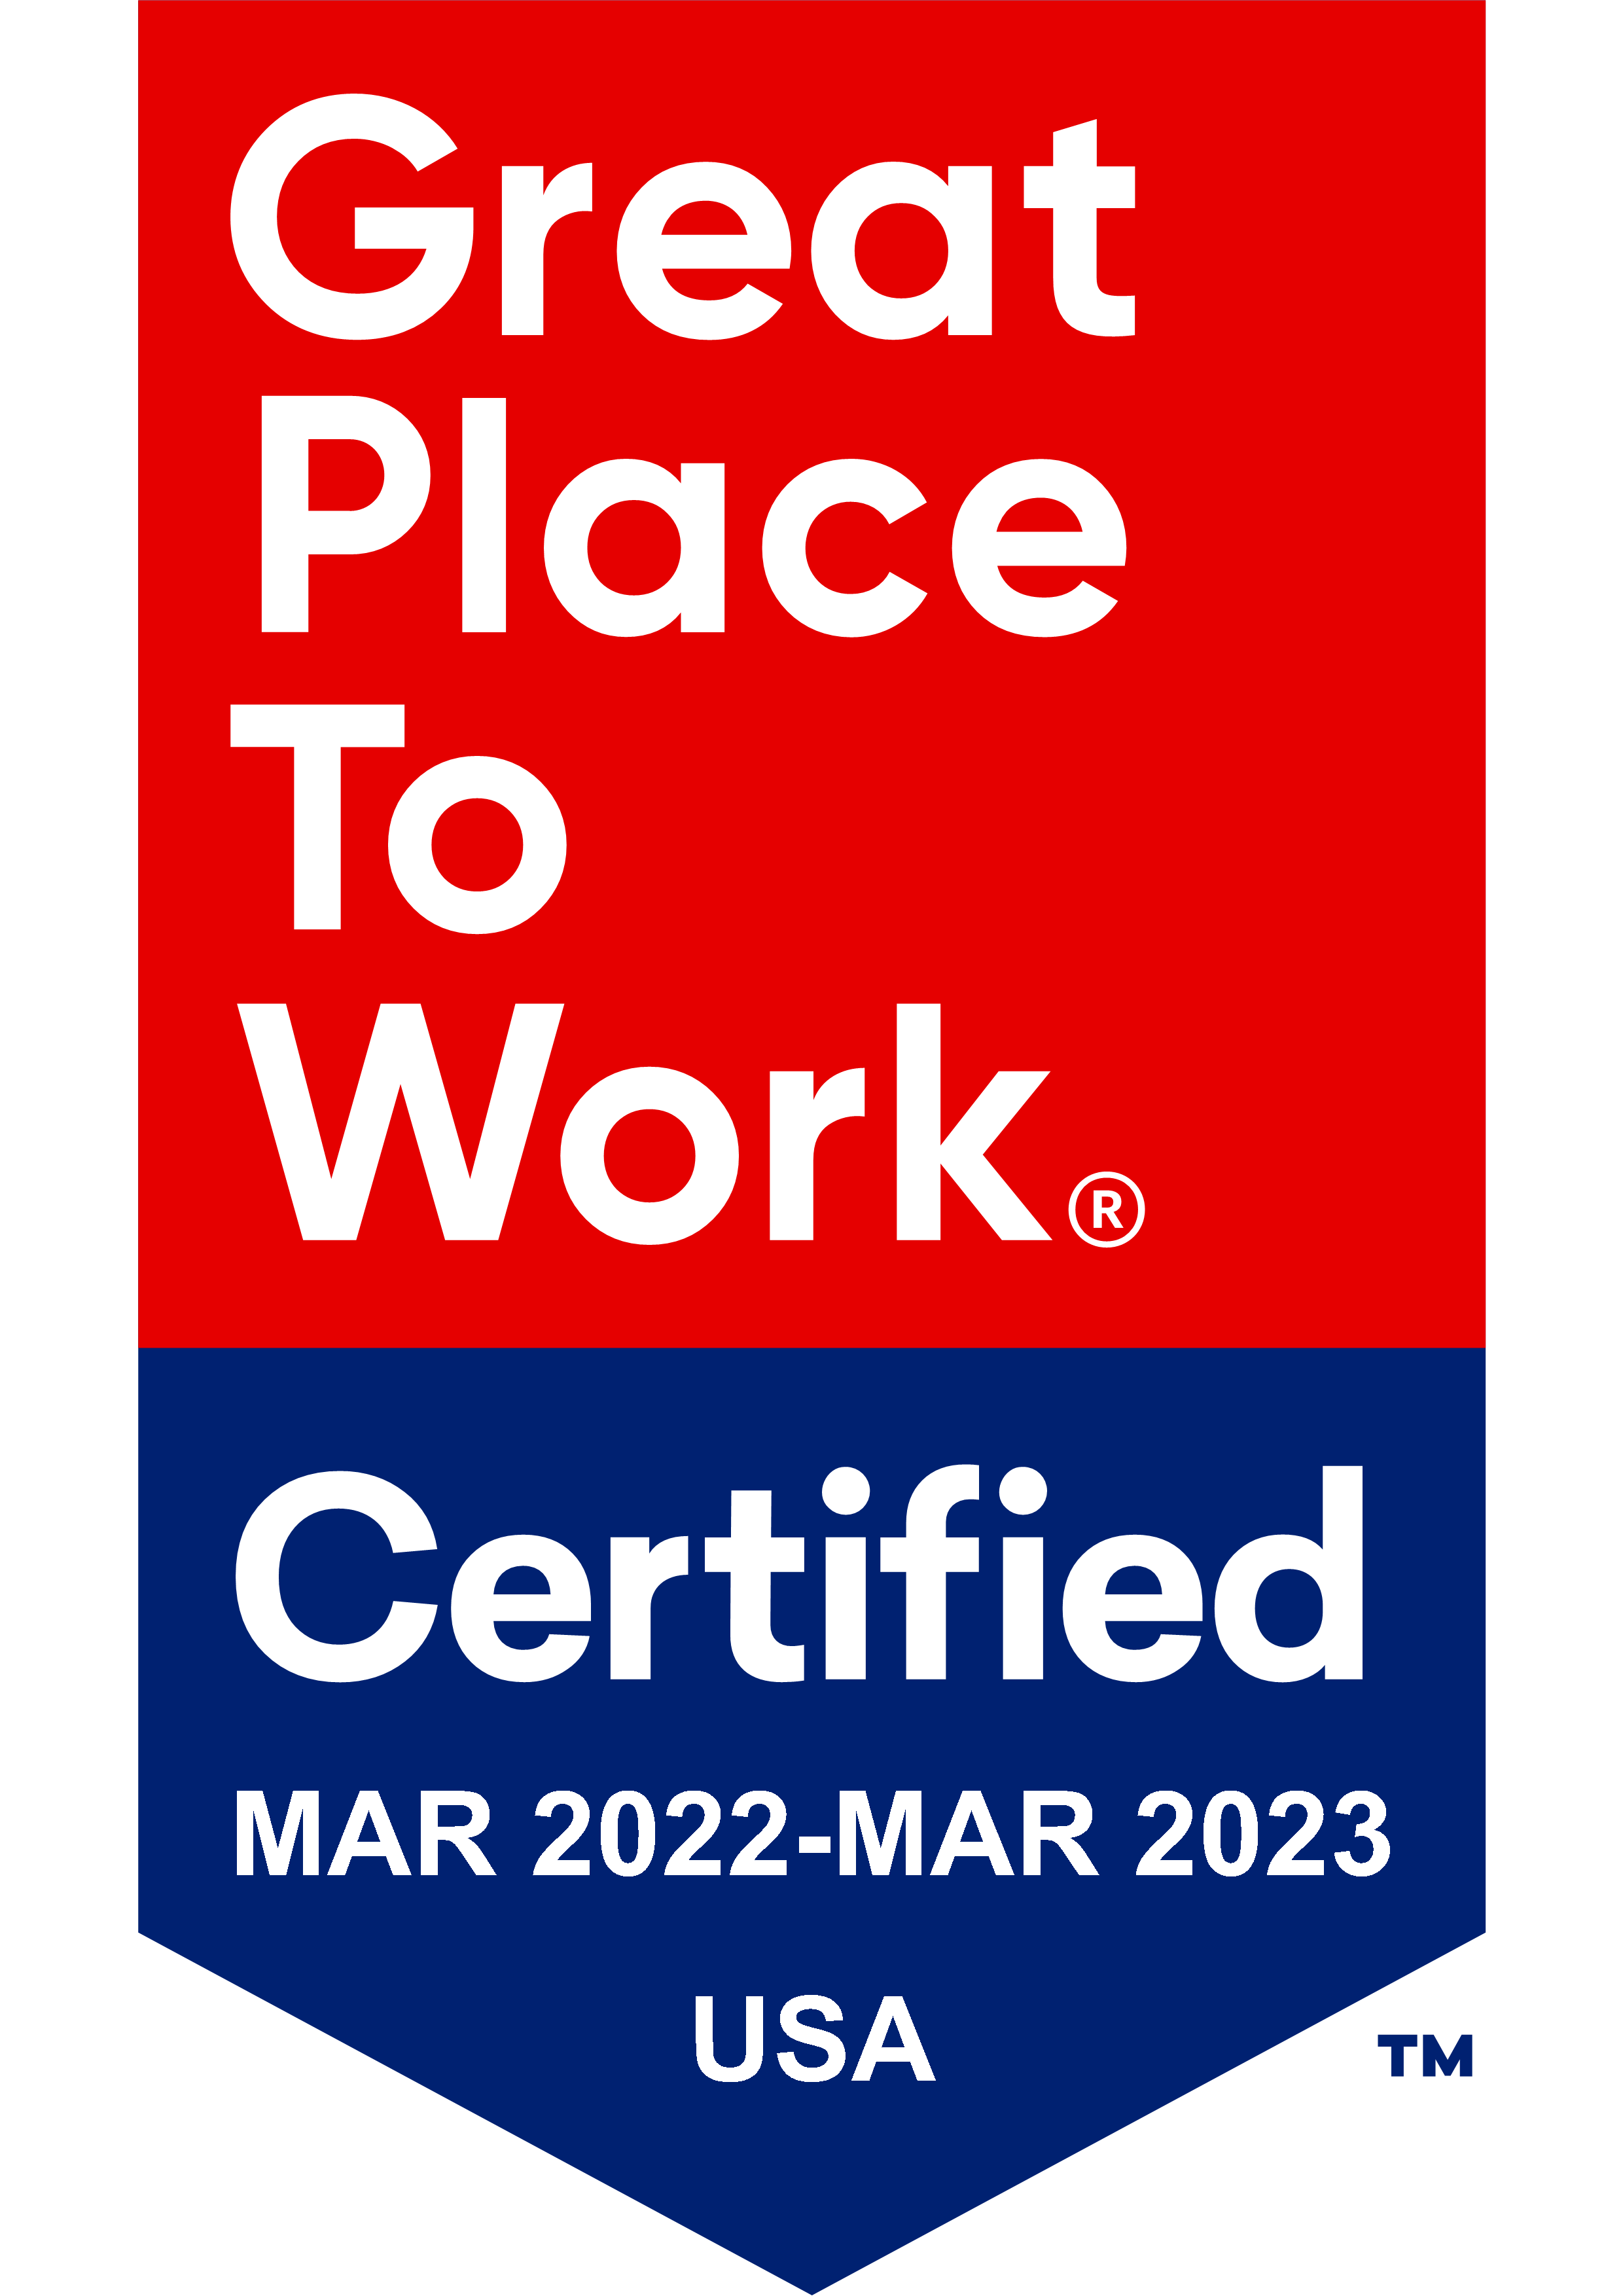 Logistics Plus Re-Certified as a 'Great Place to Work' for a Fifth Consecutive Year